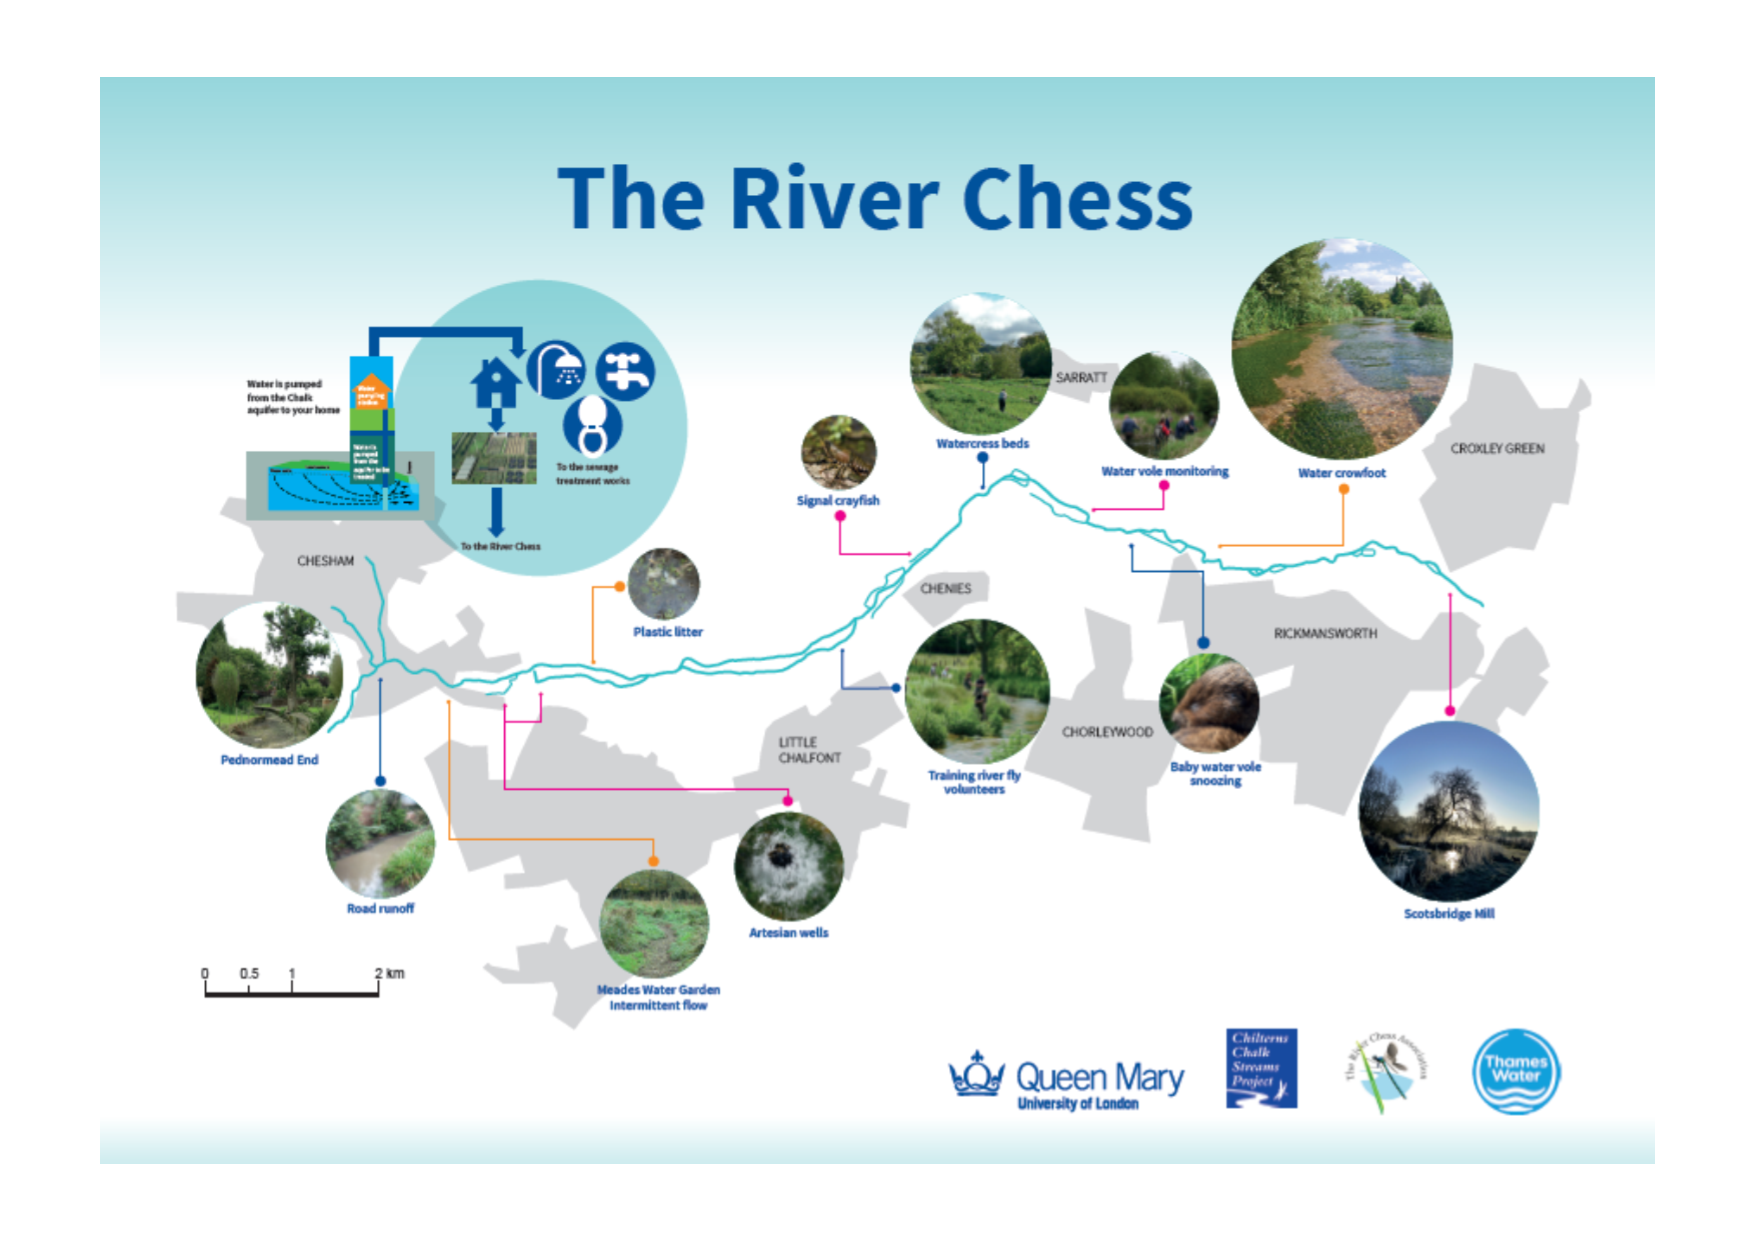 A schematic diagram of the River Chess showing different activities along its course.